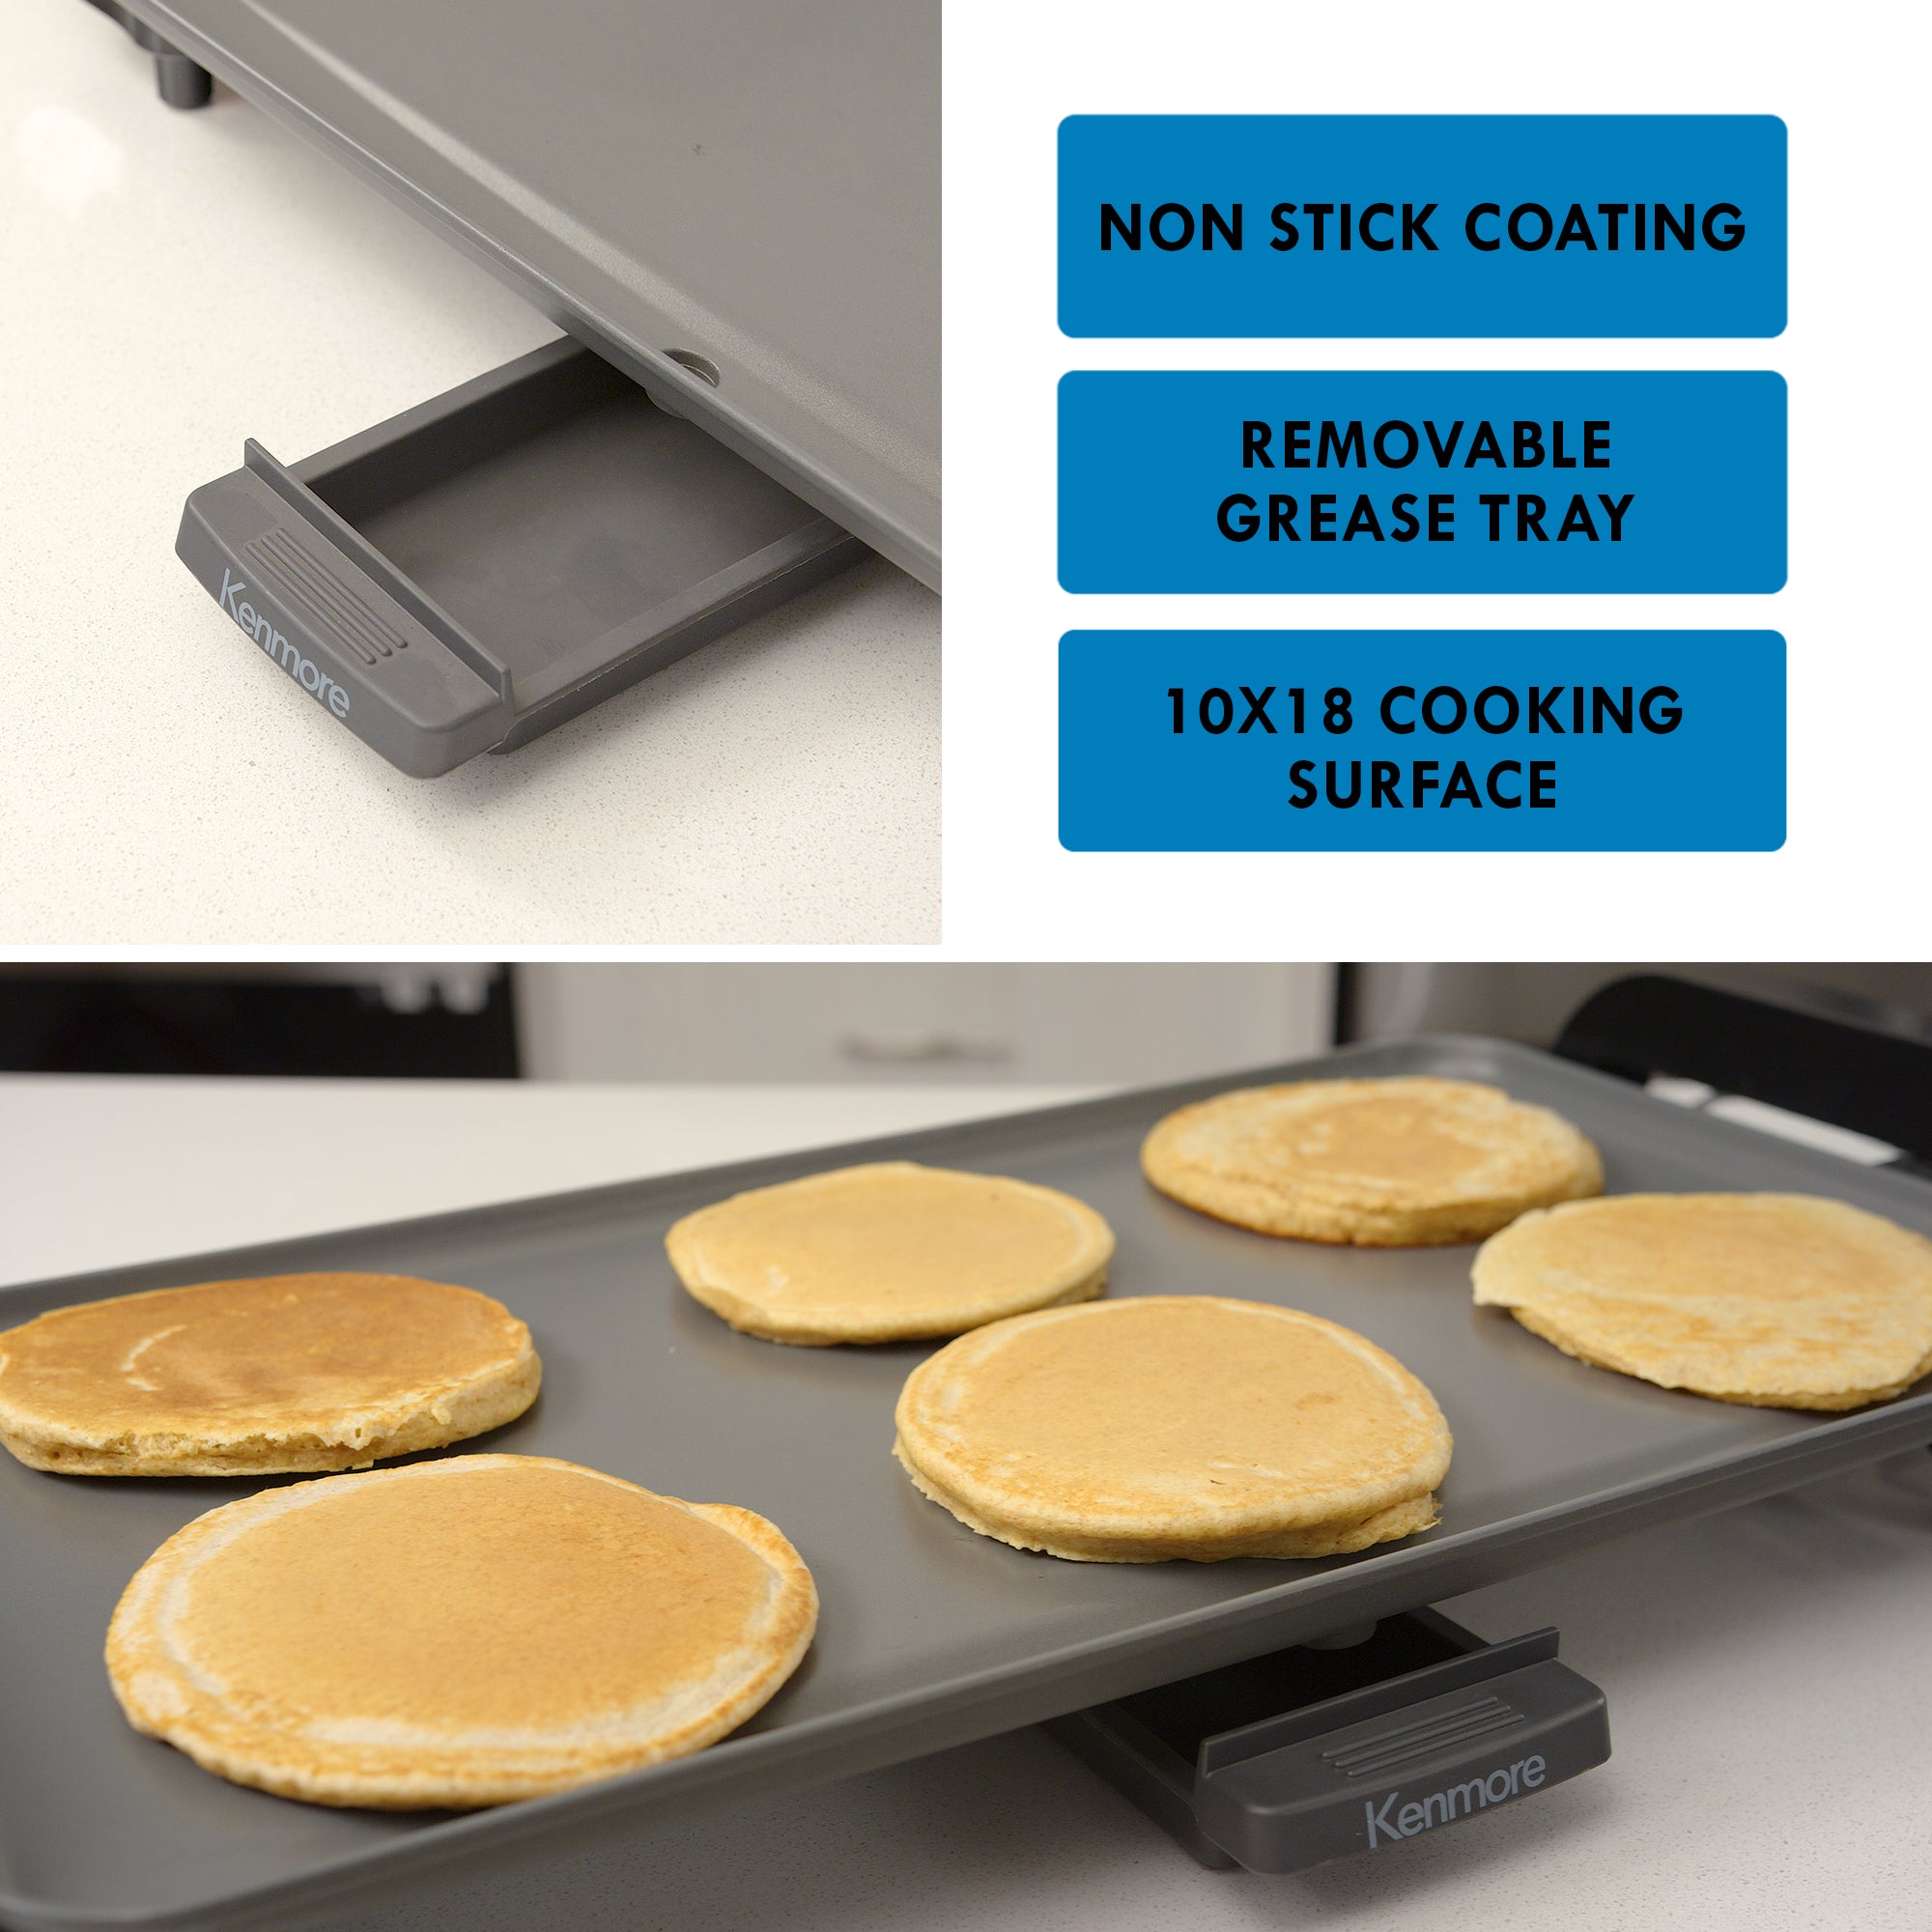 Two closeup images show the Kenmore non-stick electric griddle with pancakes cooking on it (bottom) and removable drip tray (top) with features listed to the right: non-stick coating; removable grease tray; 10x18 cooking surface